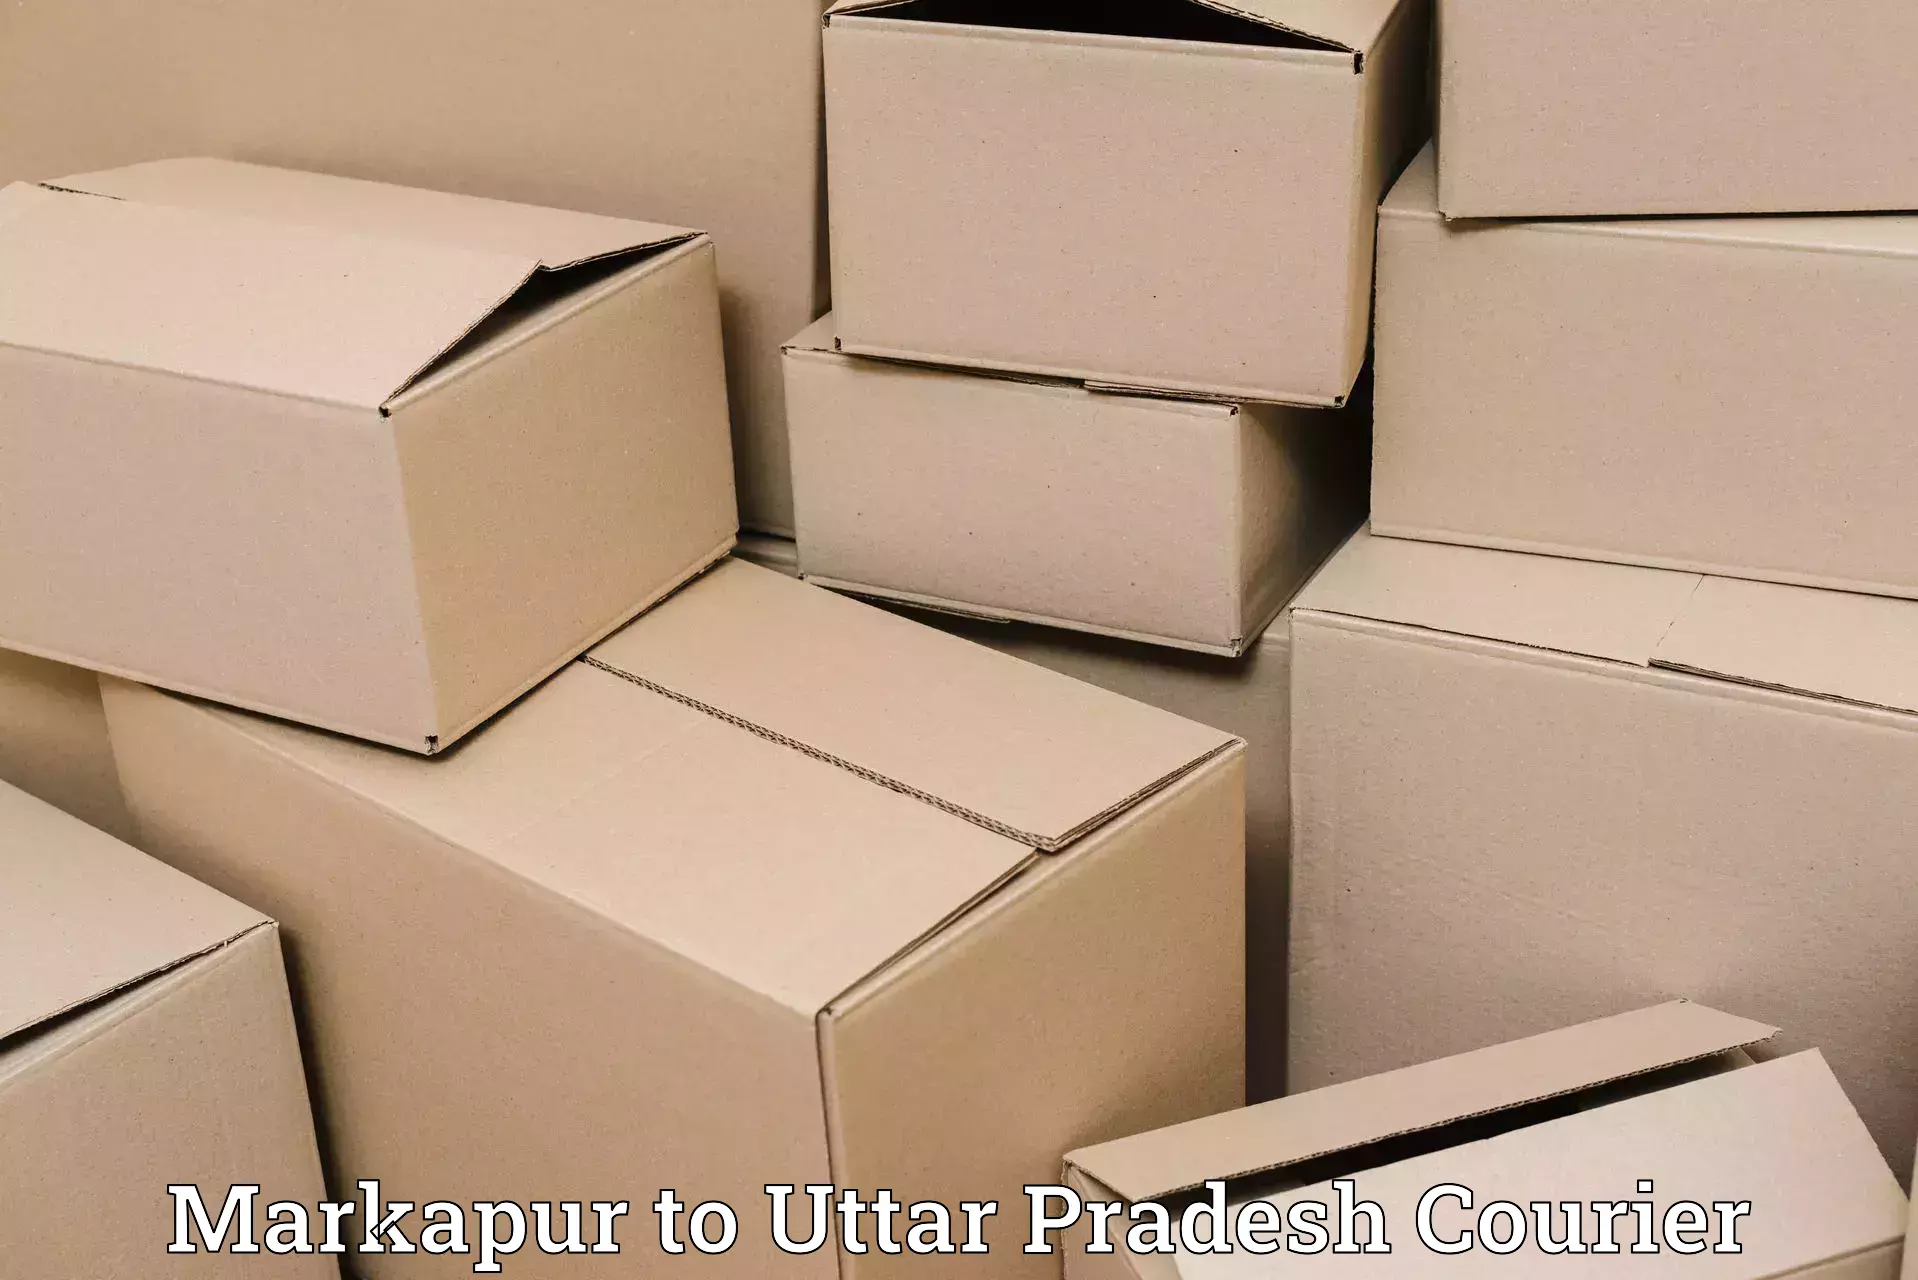 Tailored delivery services Markapur to Chandauli